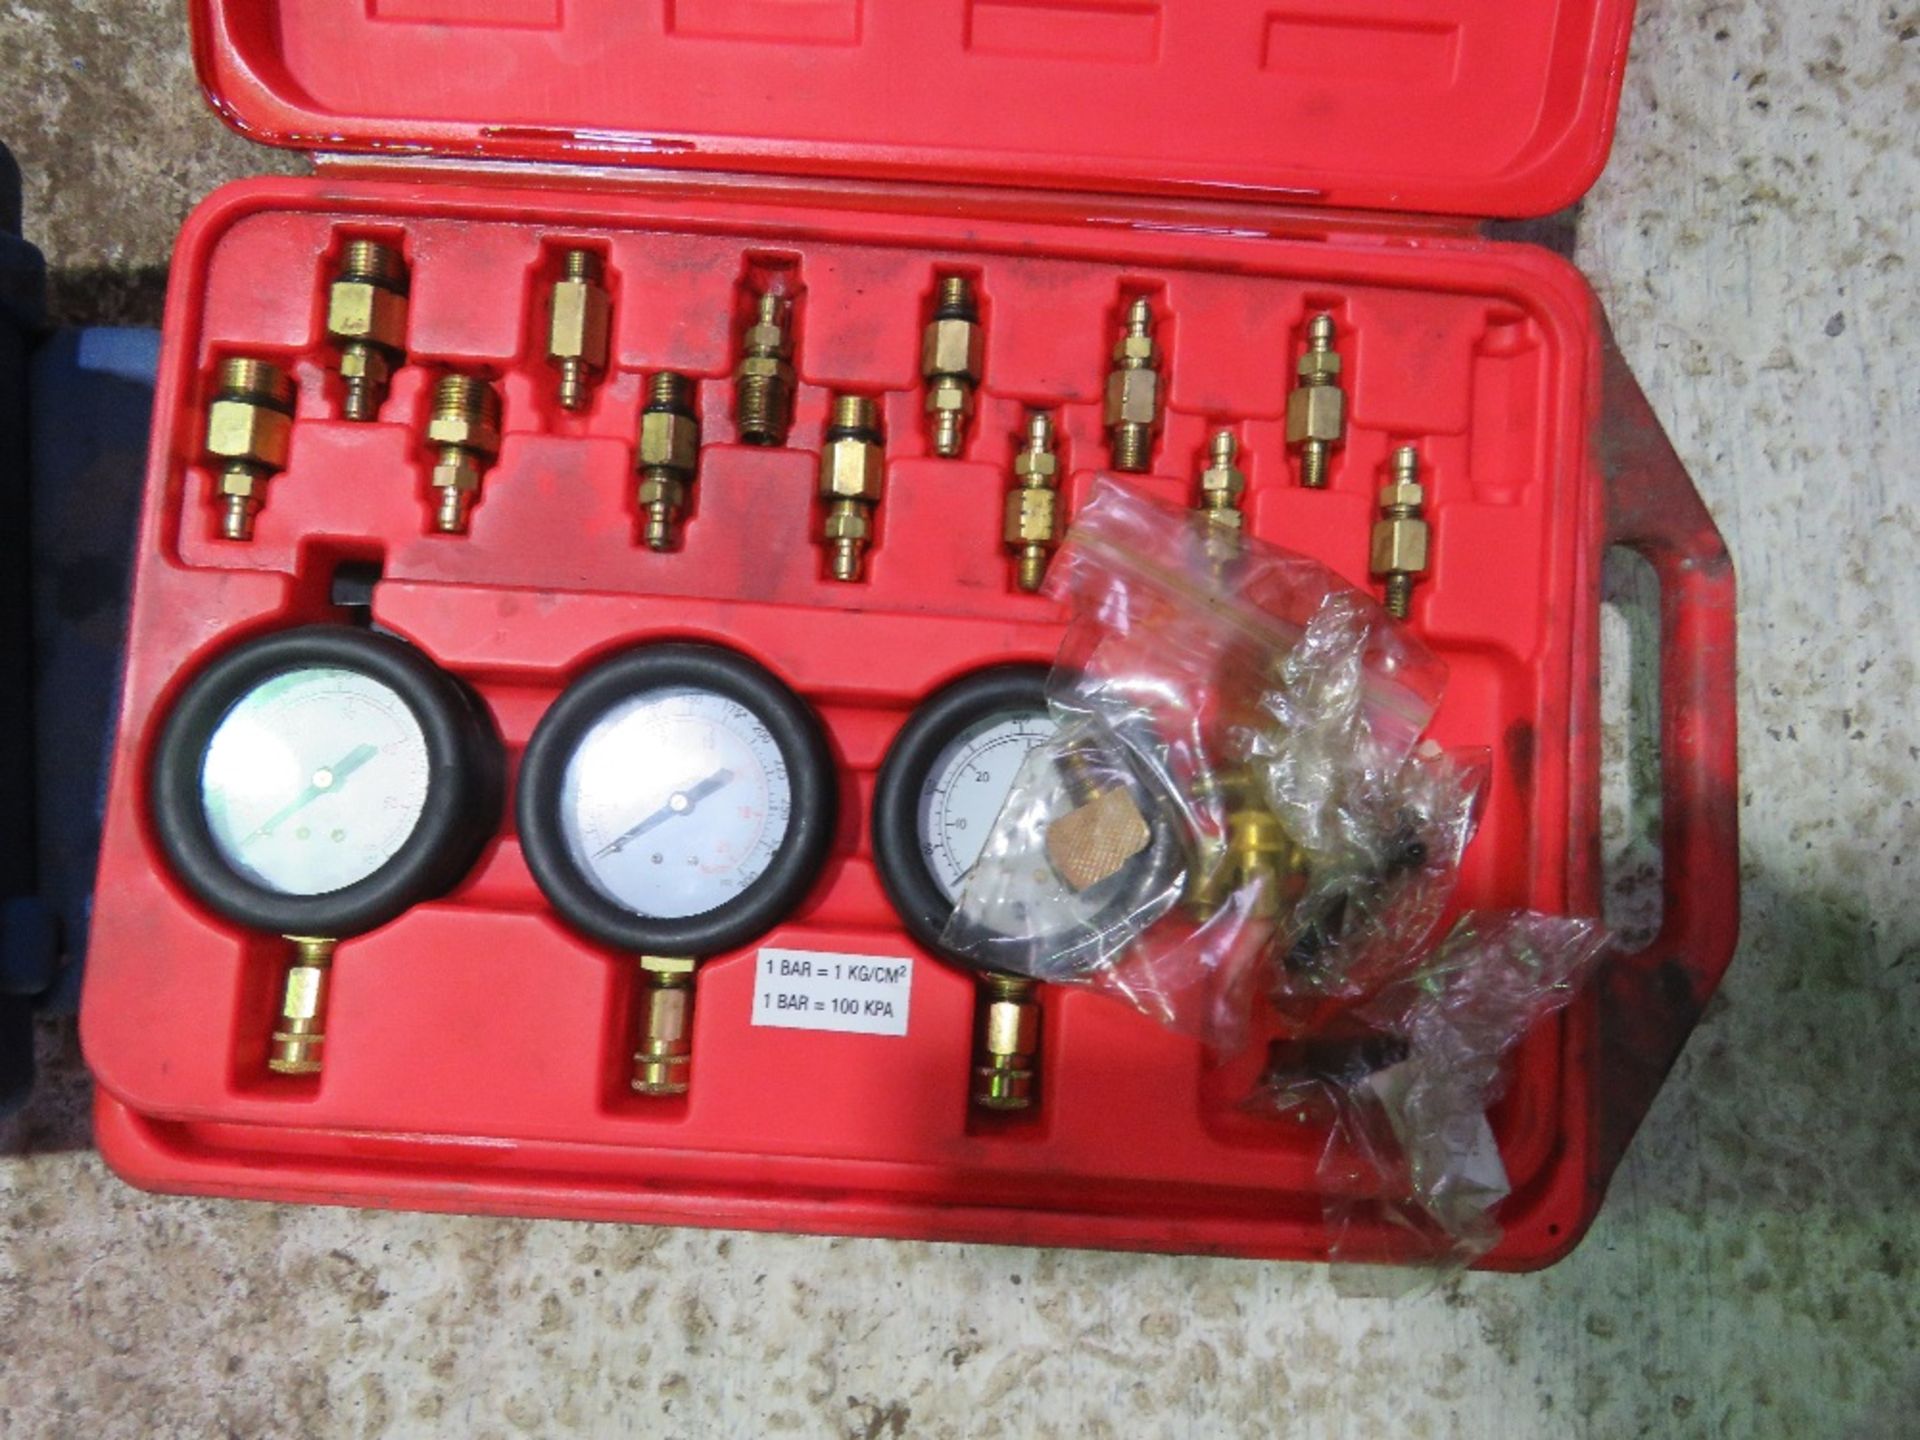 5 X BOXED VEHICLE REPAIR ITEMS INCLUDING CYLINDER LEAKAGE TESTER SET. SOURCED FROM GARAGE COMPANY LI - Image 2 of 6